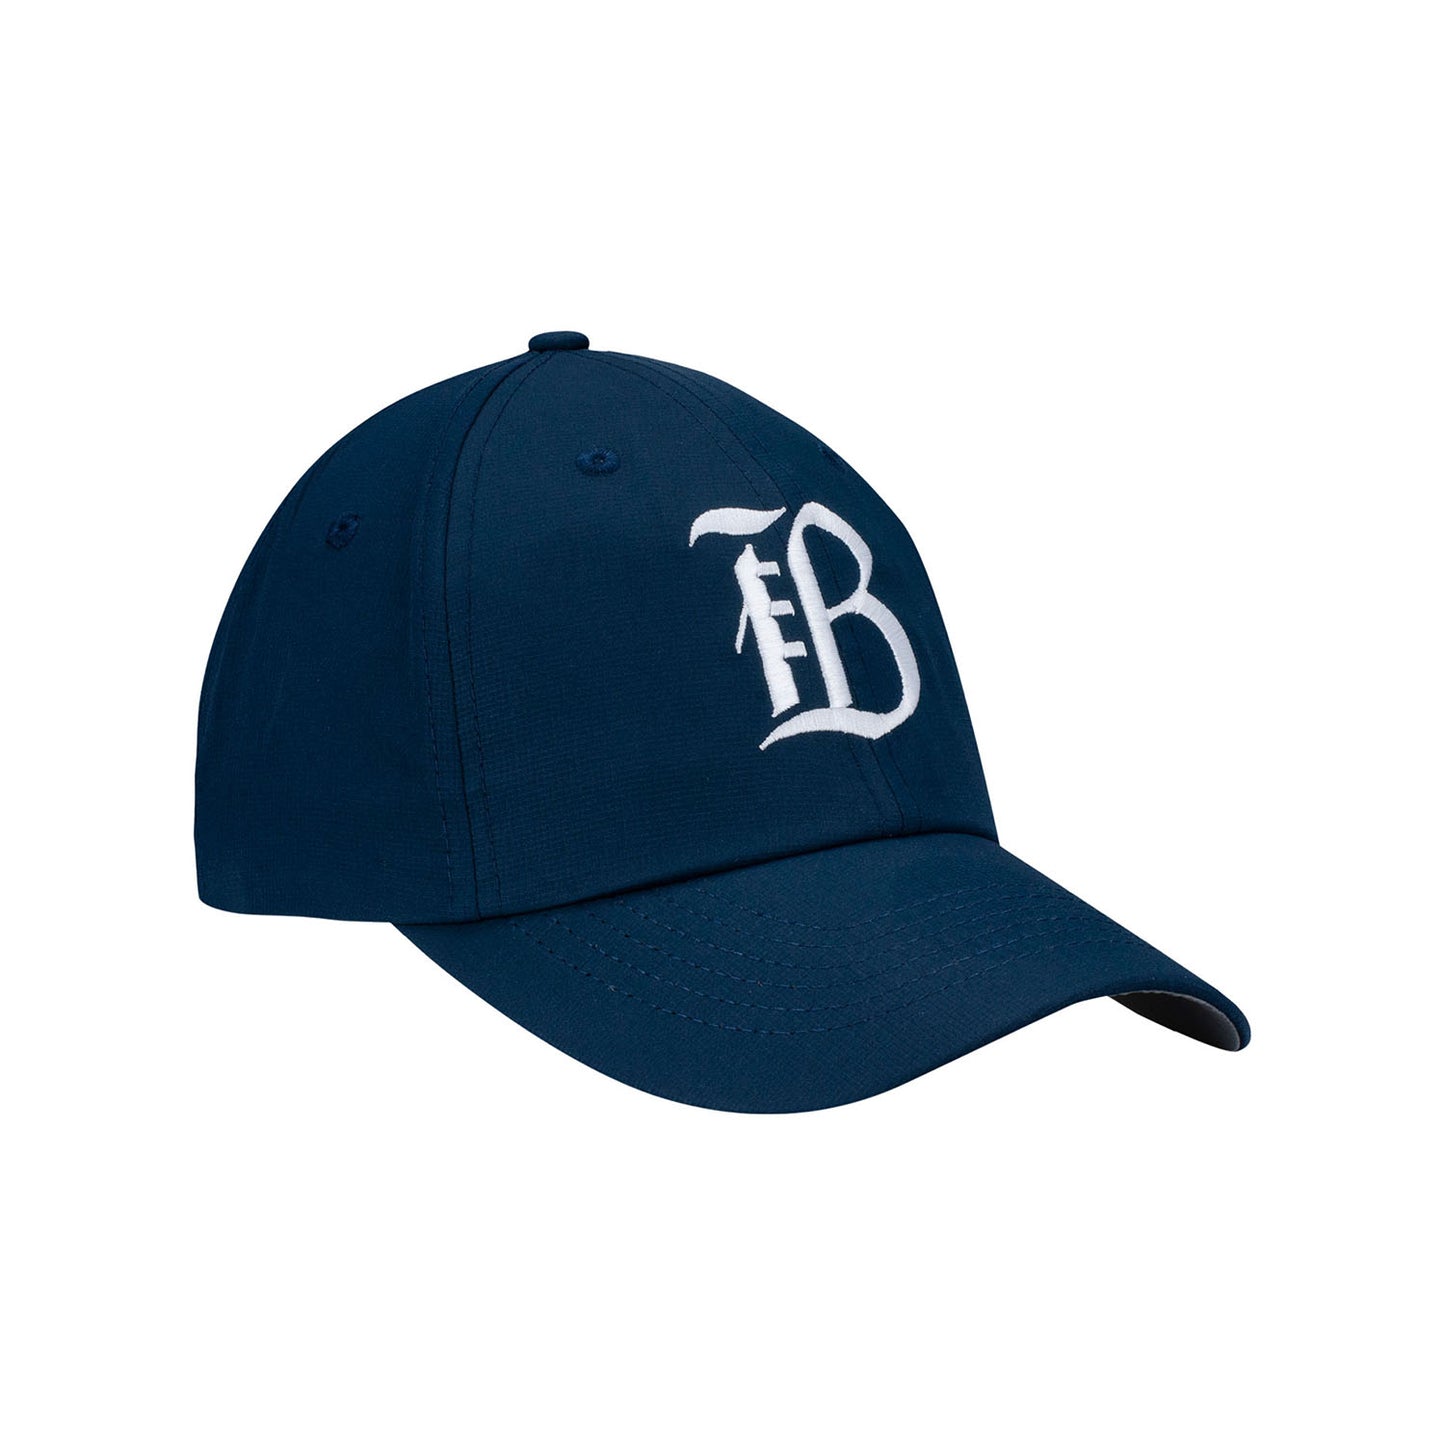 Unisex Bay FC Navy Hat - Angled Right Side View